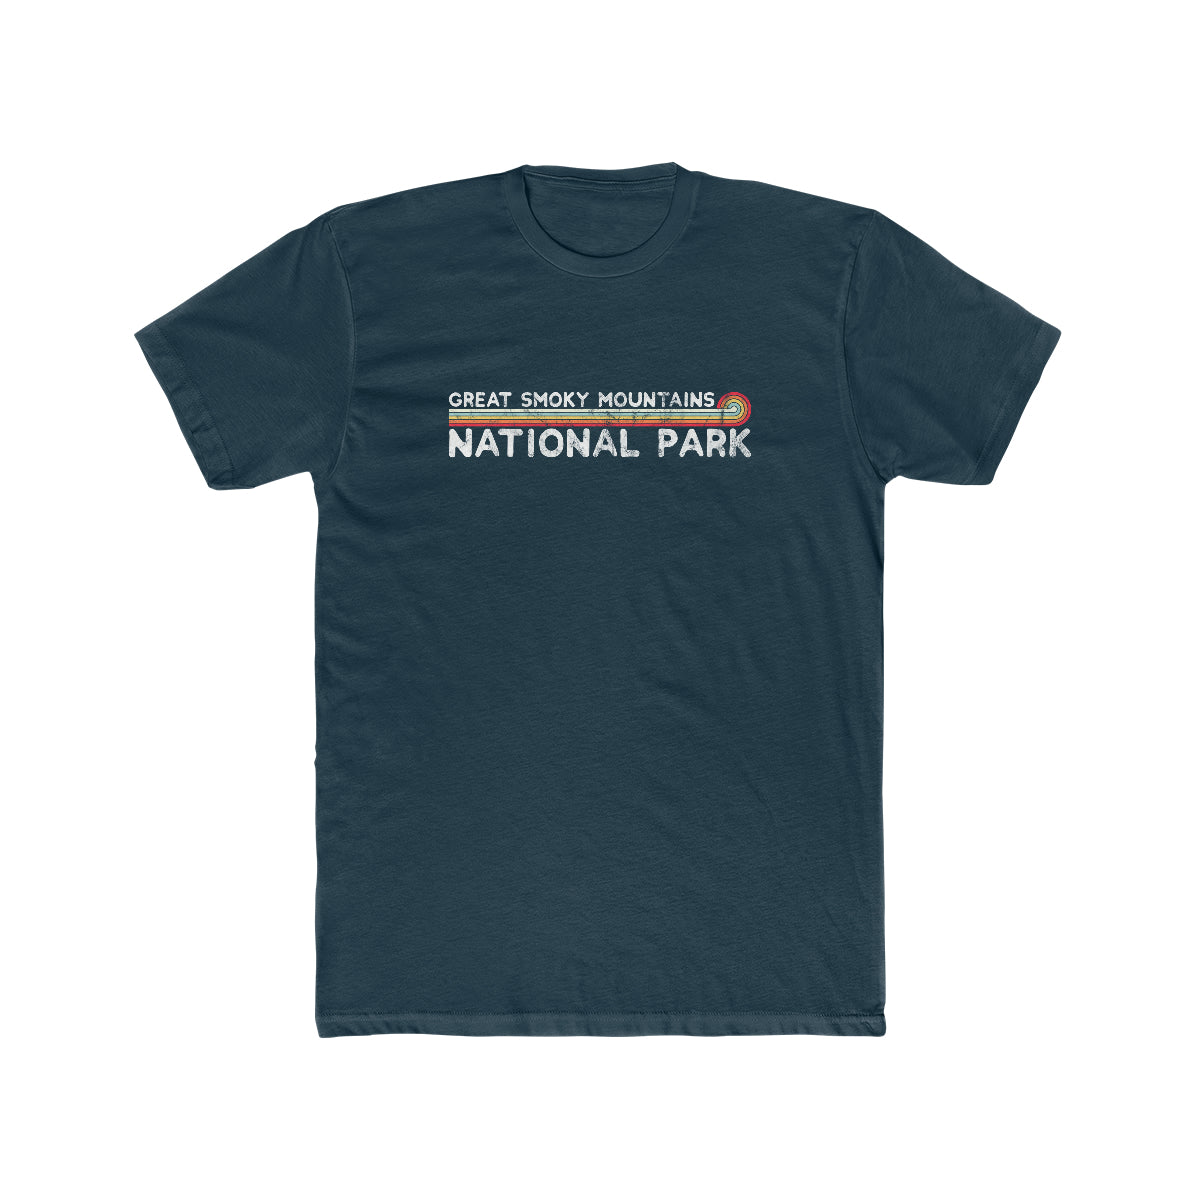 Great Smoky Mountains National Park T-Shirt - Vintage Stretched Sunrise